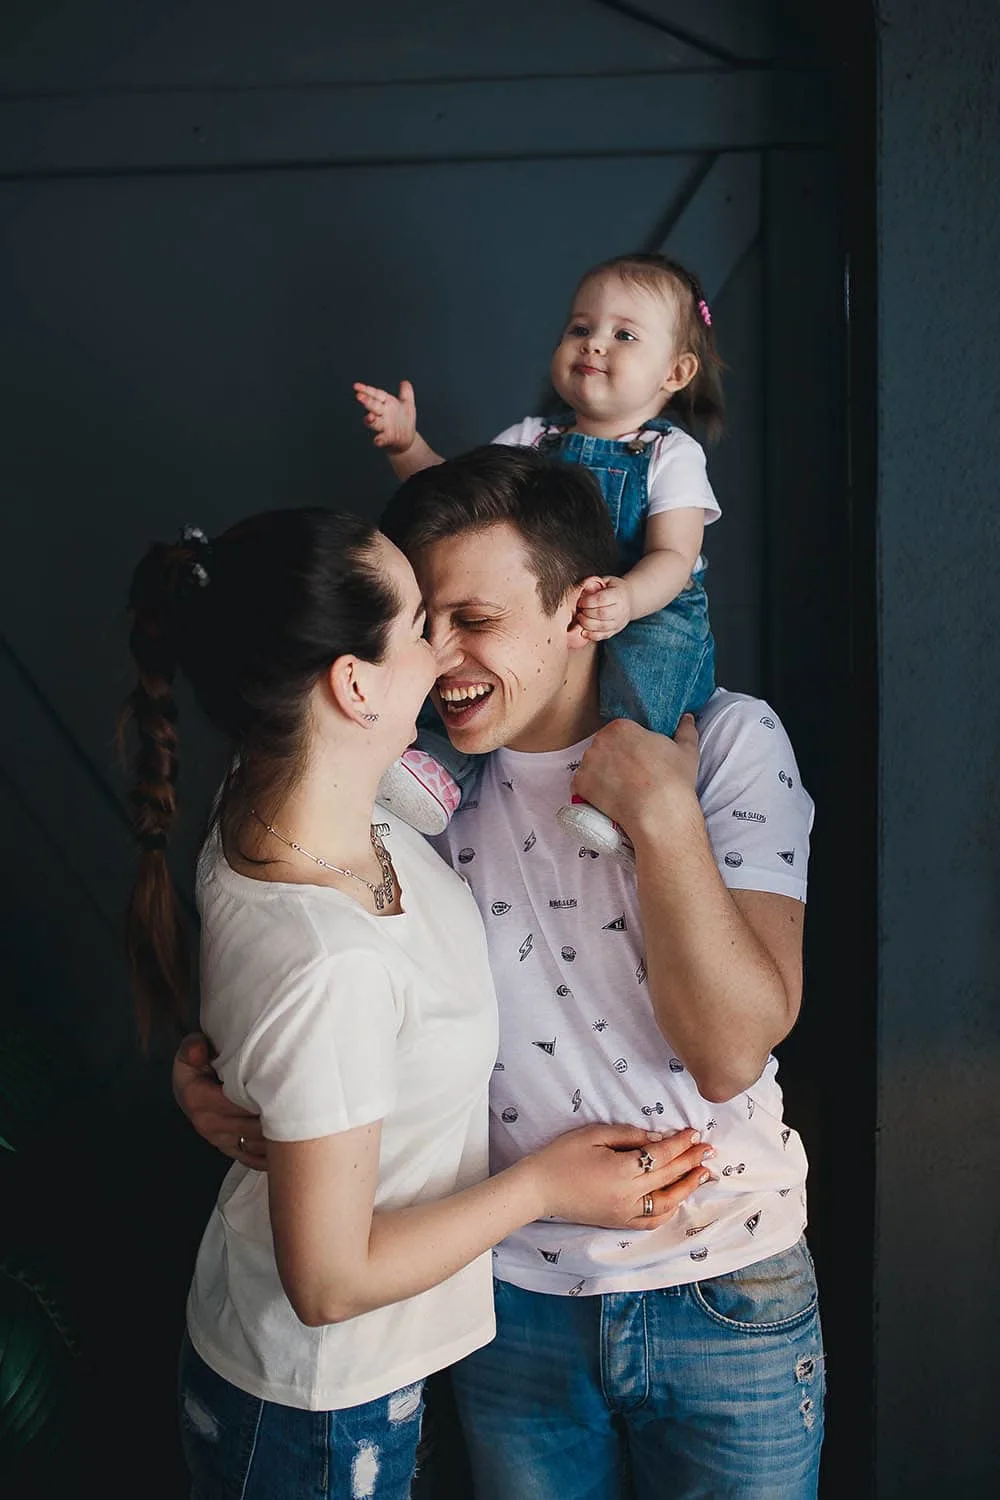 It's easy to let your relationship take a back seat after you start a family, but you can have a happy marriage after you have kids. If you're looking for a few ideas to make that happen, these are ways you can do it. 